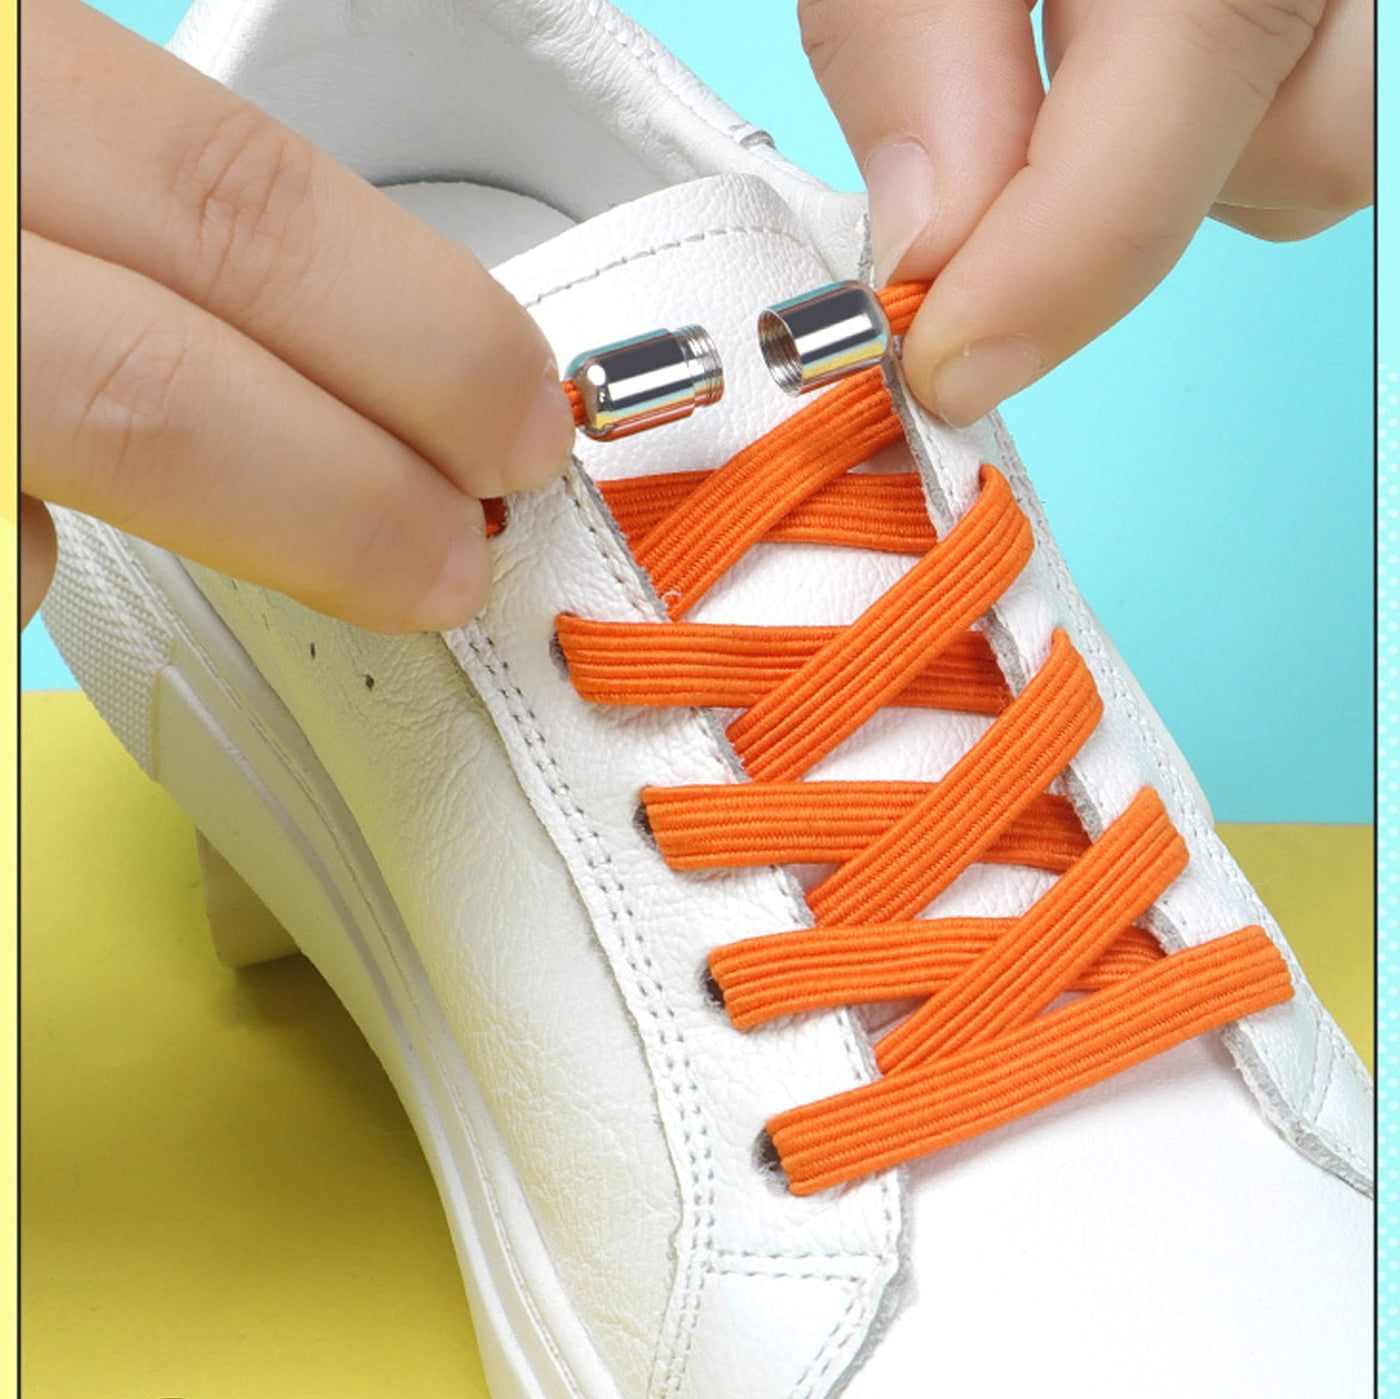 anan520 Elastic No Tie Shoe Laces for Adults,Kids,Elderly,System with Elastic Shoe Laces(2 Pairs)